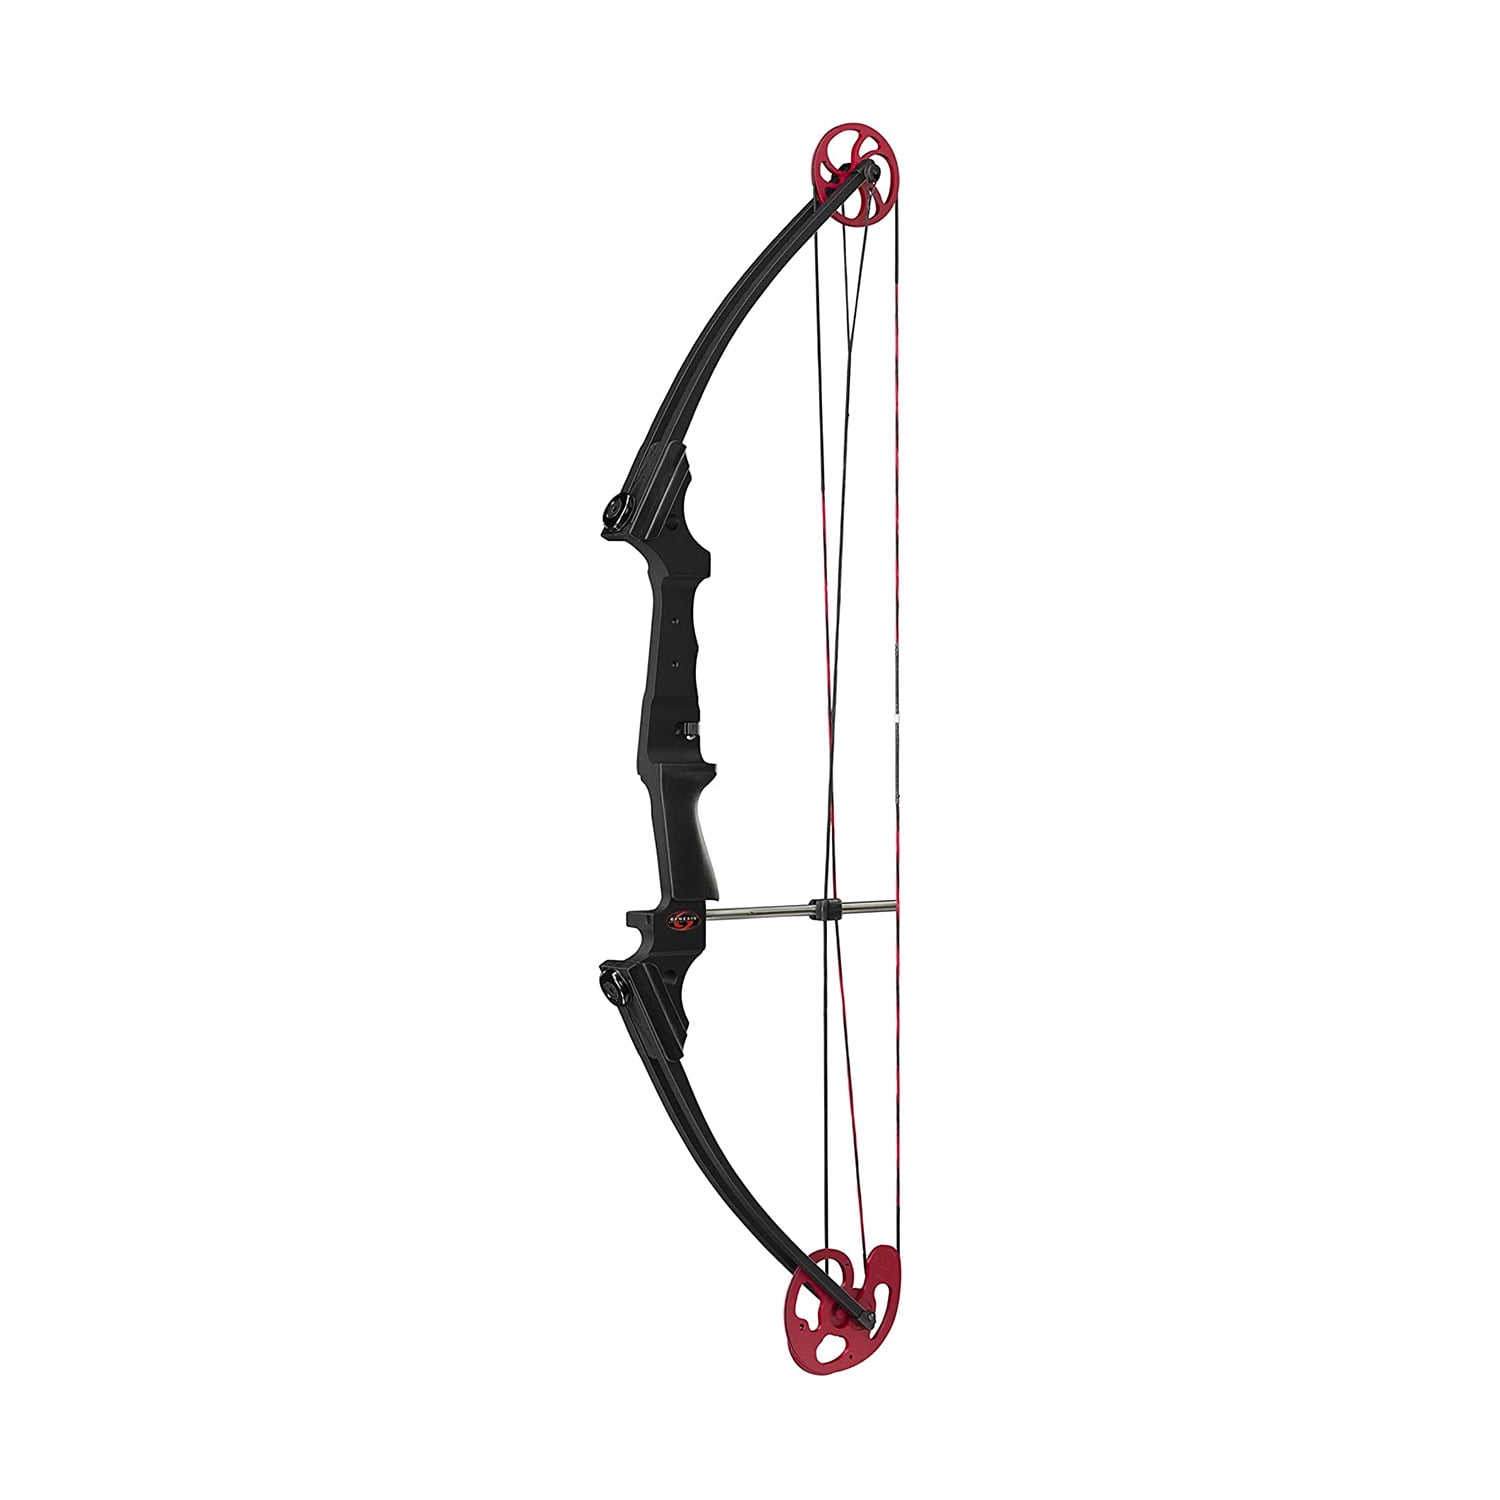 Details about   Archery Bow Recurve Hunting Shooting Outdoor Sports Activity Right Hand 